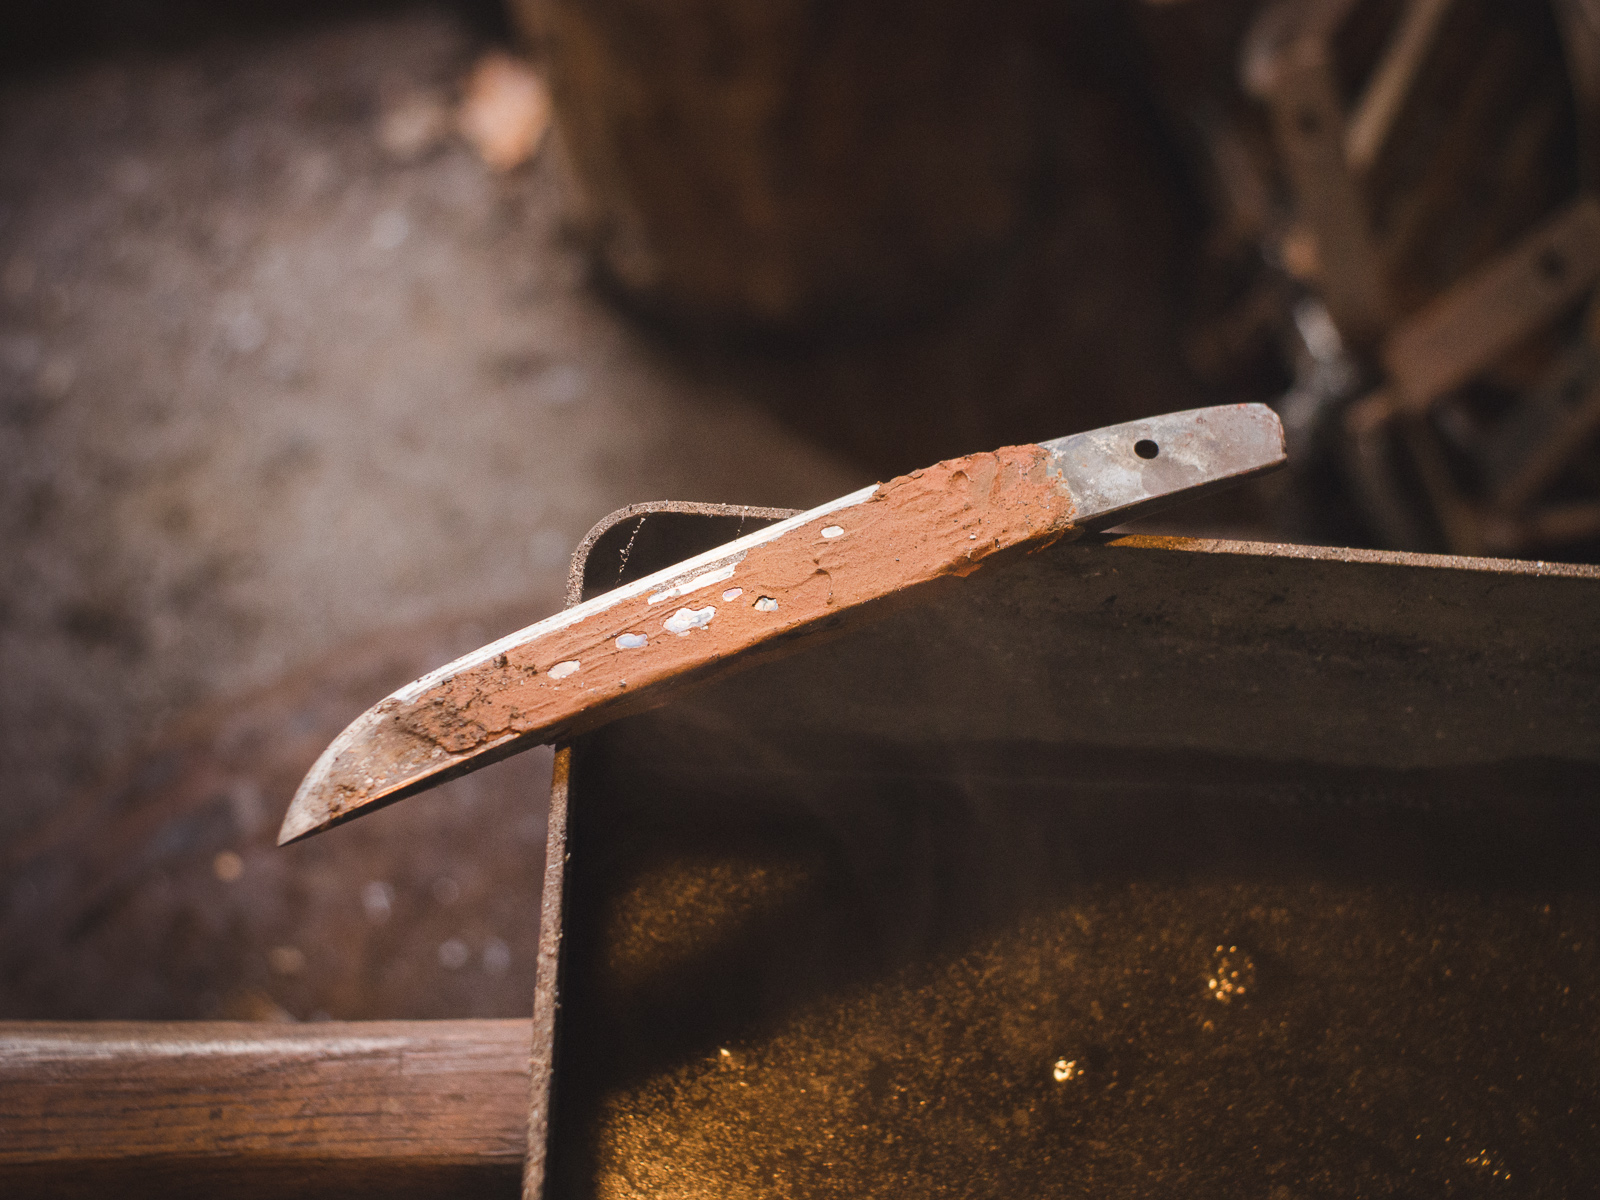 Island Blacksmith: Hand forged reclaimed knives made from farm equipment